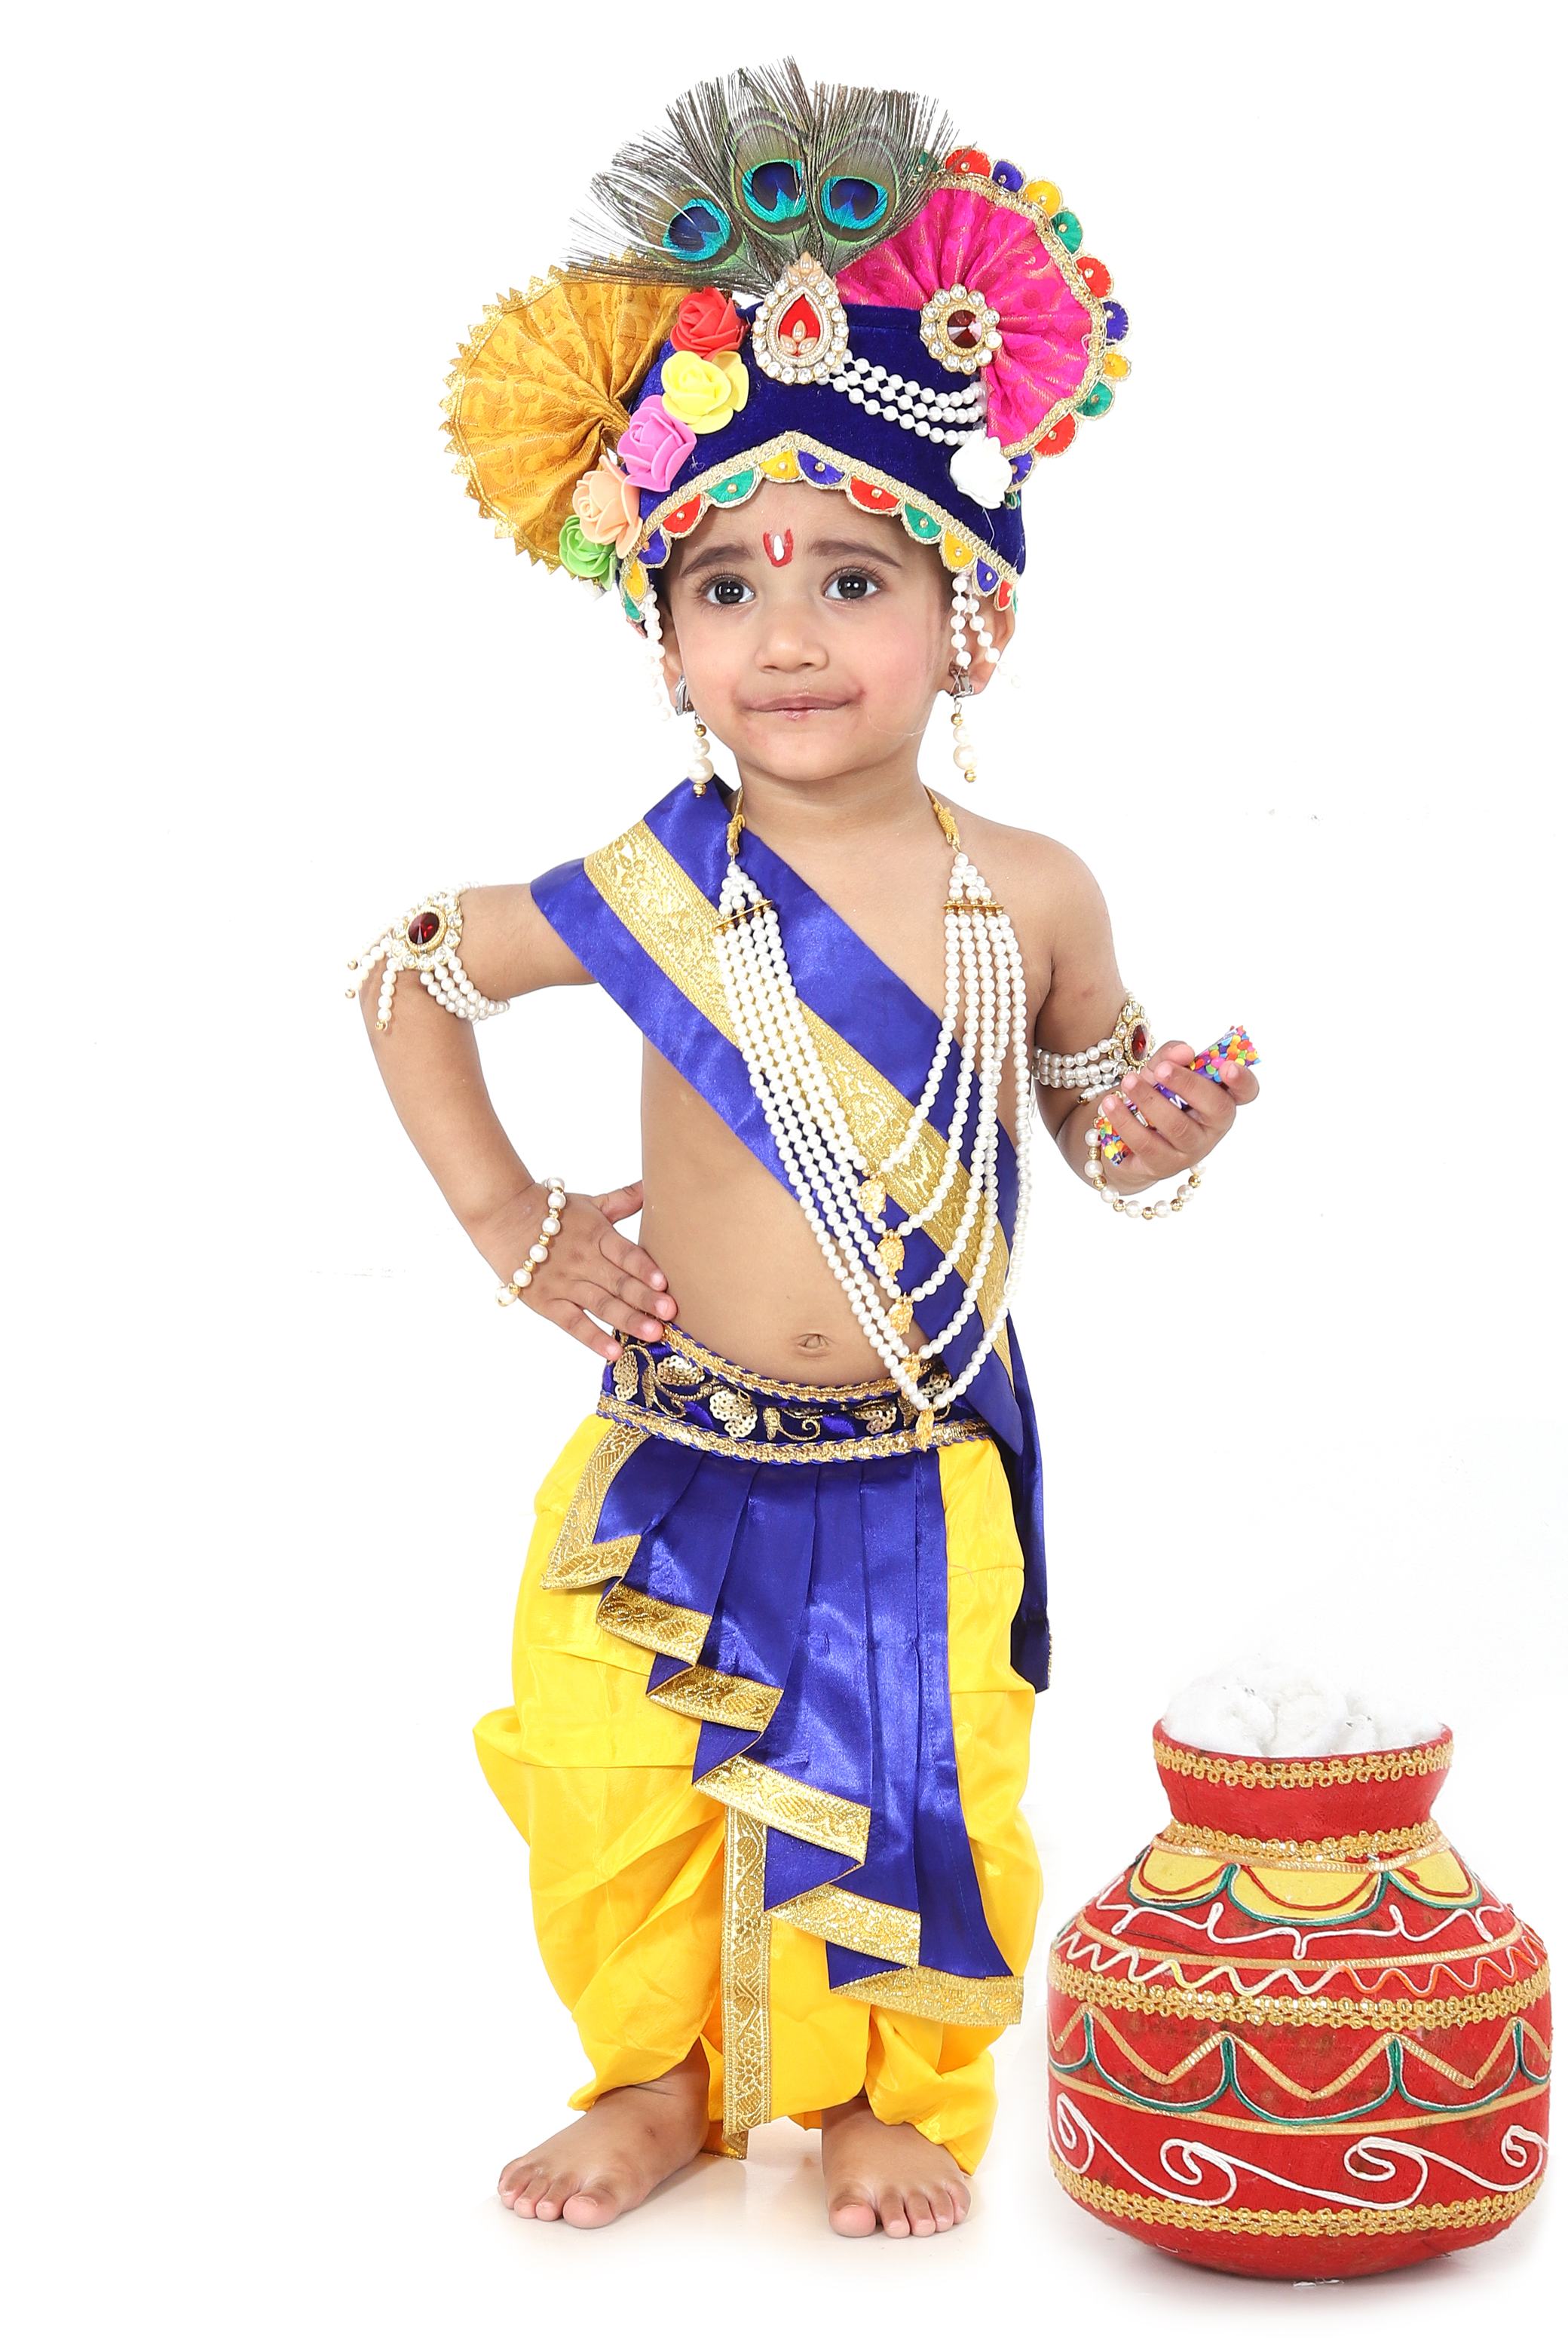 Fancy Dress for Kids - Buy Costumes for Girls, Boys Online in India